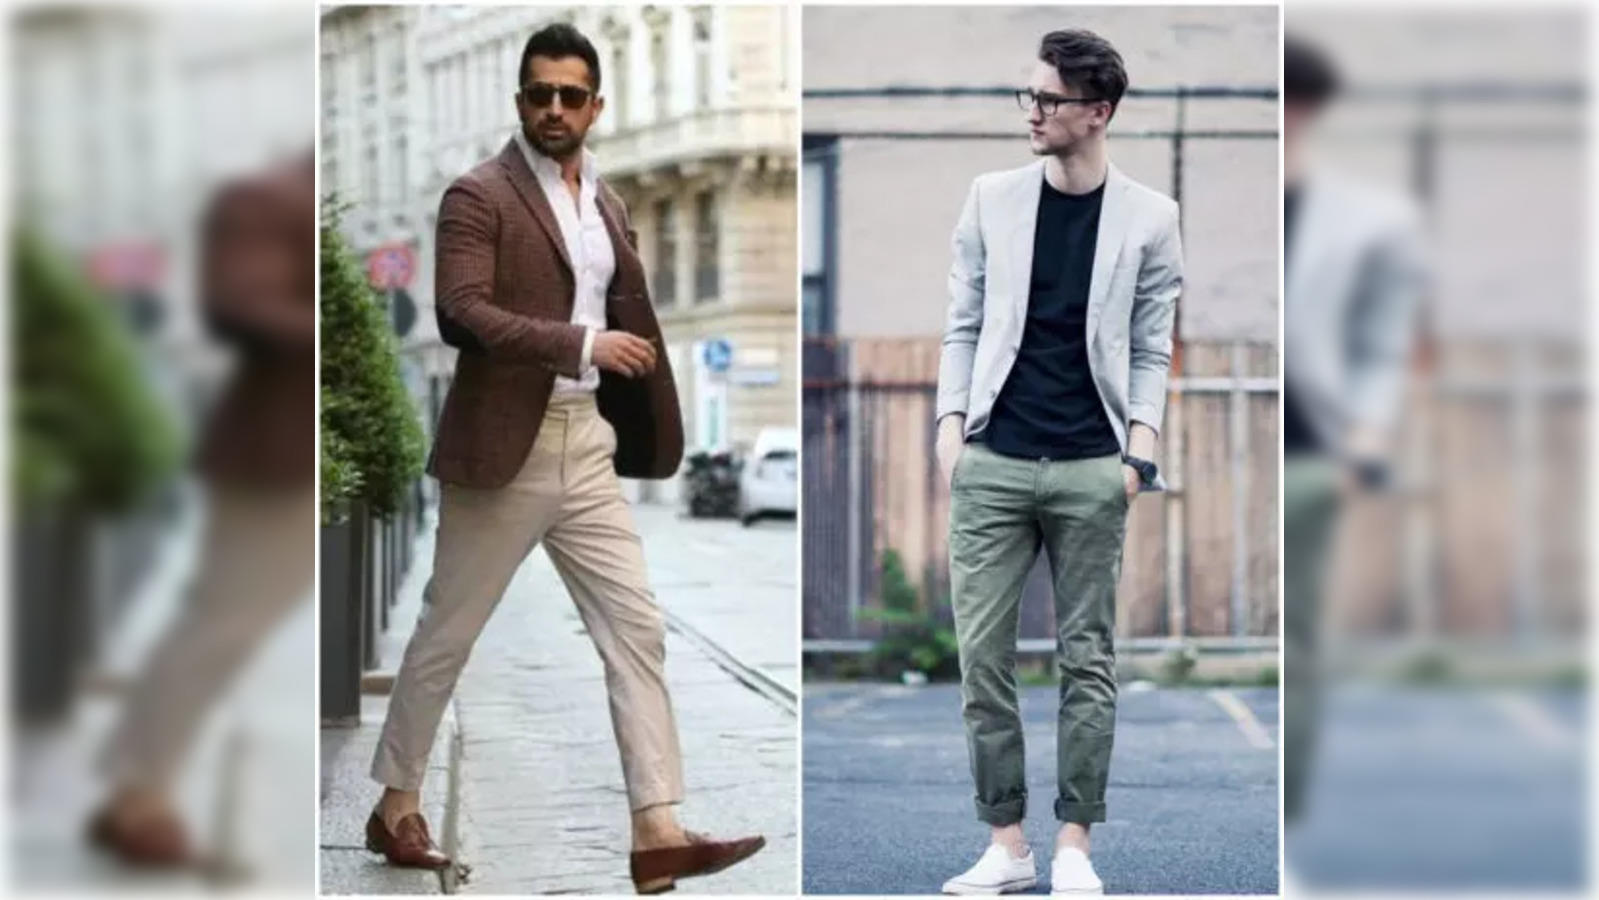 10 Best Ways To Style The Casual Blazer Outfit for Men  Blazer outfits  casual, Blazer outfits men, Blazer outfits for men